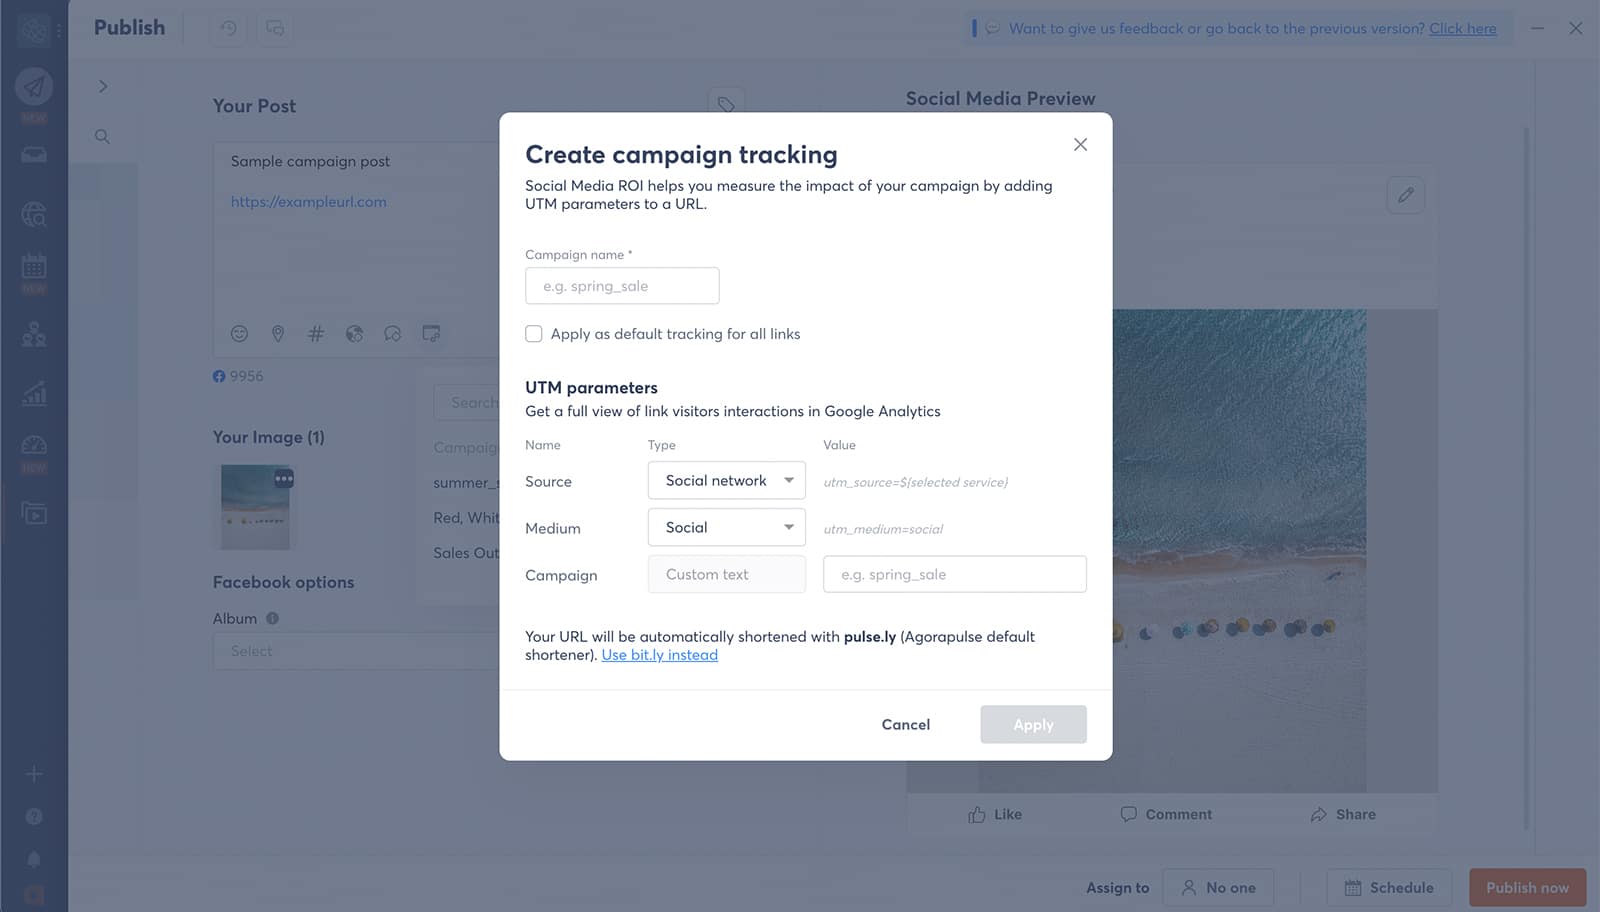 marketing planning software - Agorapulse campaign tracking